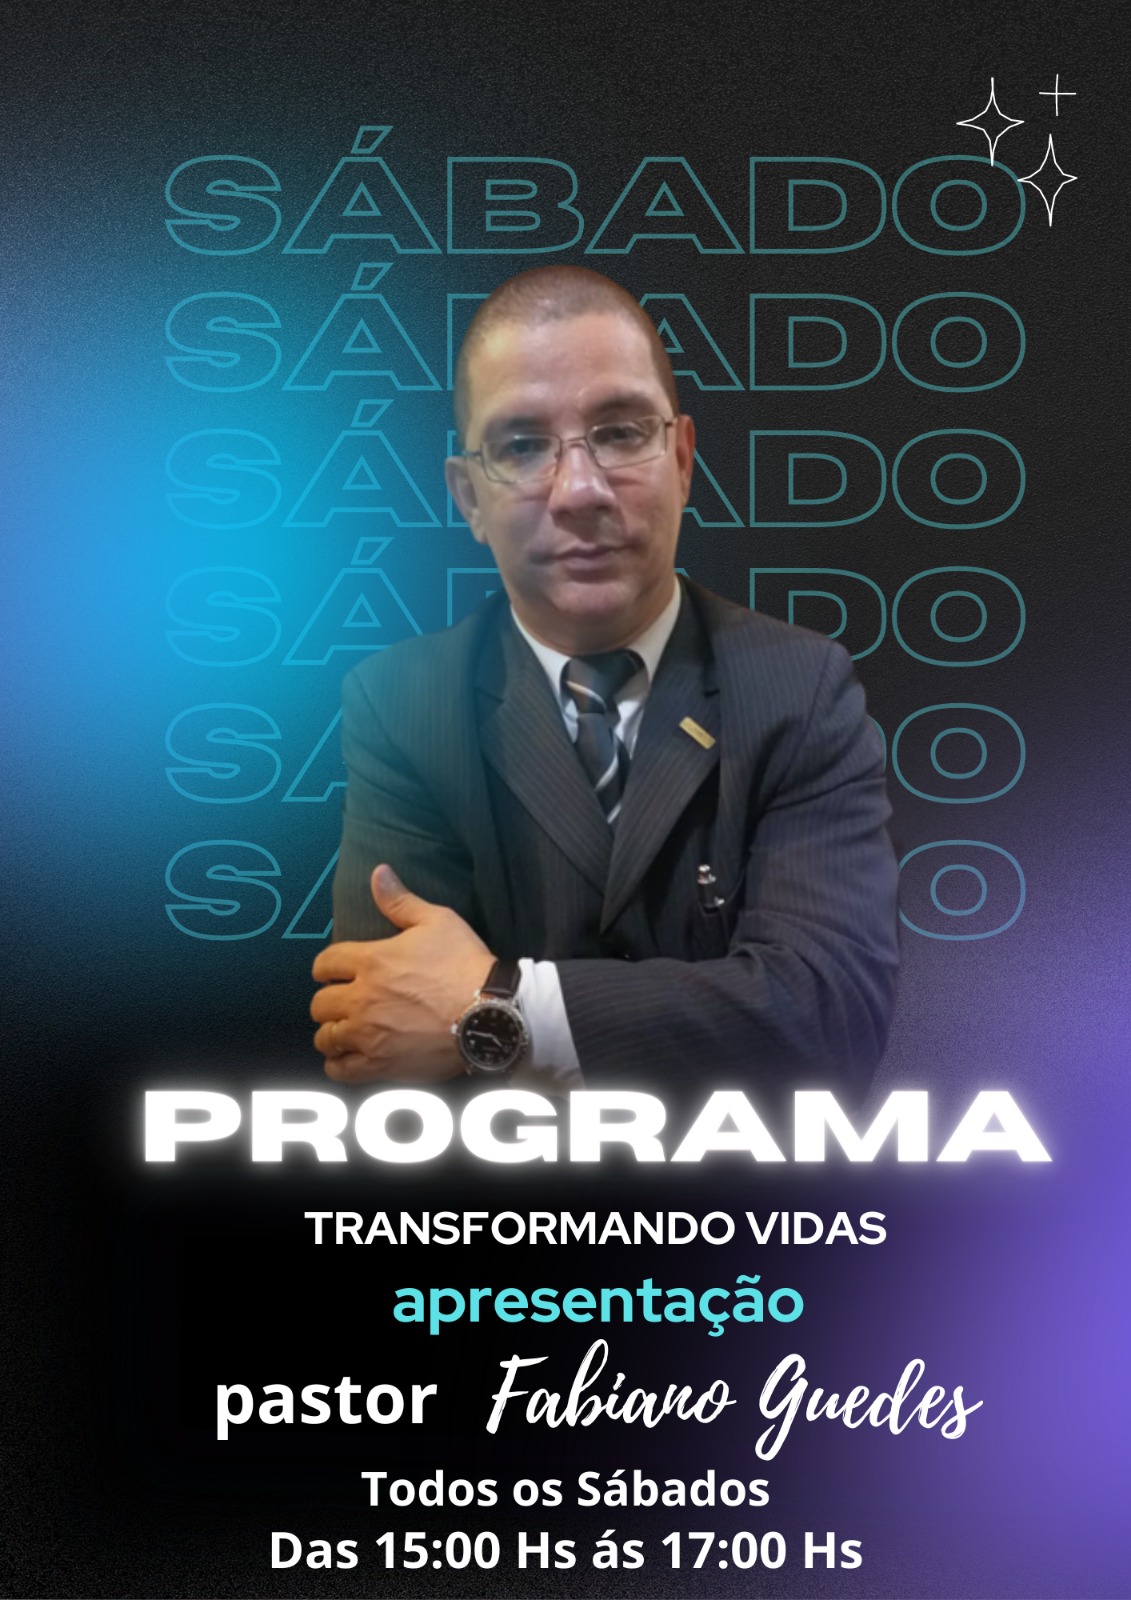 PASTOR FABIANO GUEDES